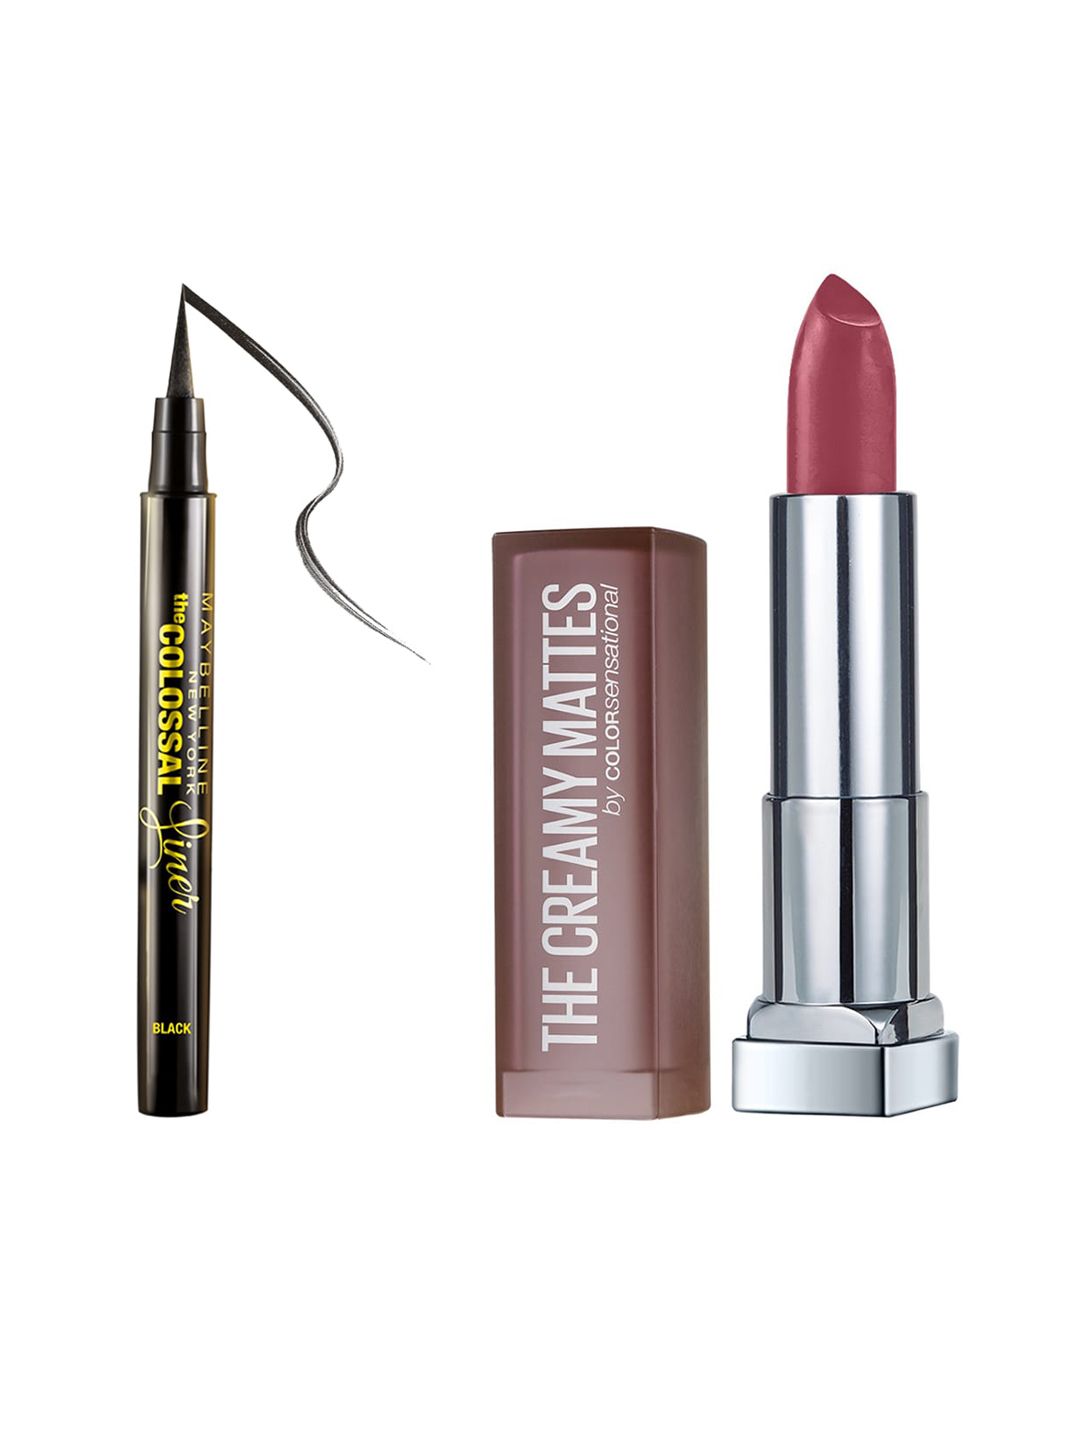 Maybelline TheColossal SketchLiner Black & ColorSensational MatteLipstick 660 TouchOfSpice Price in India